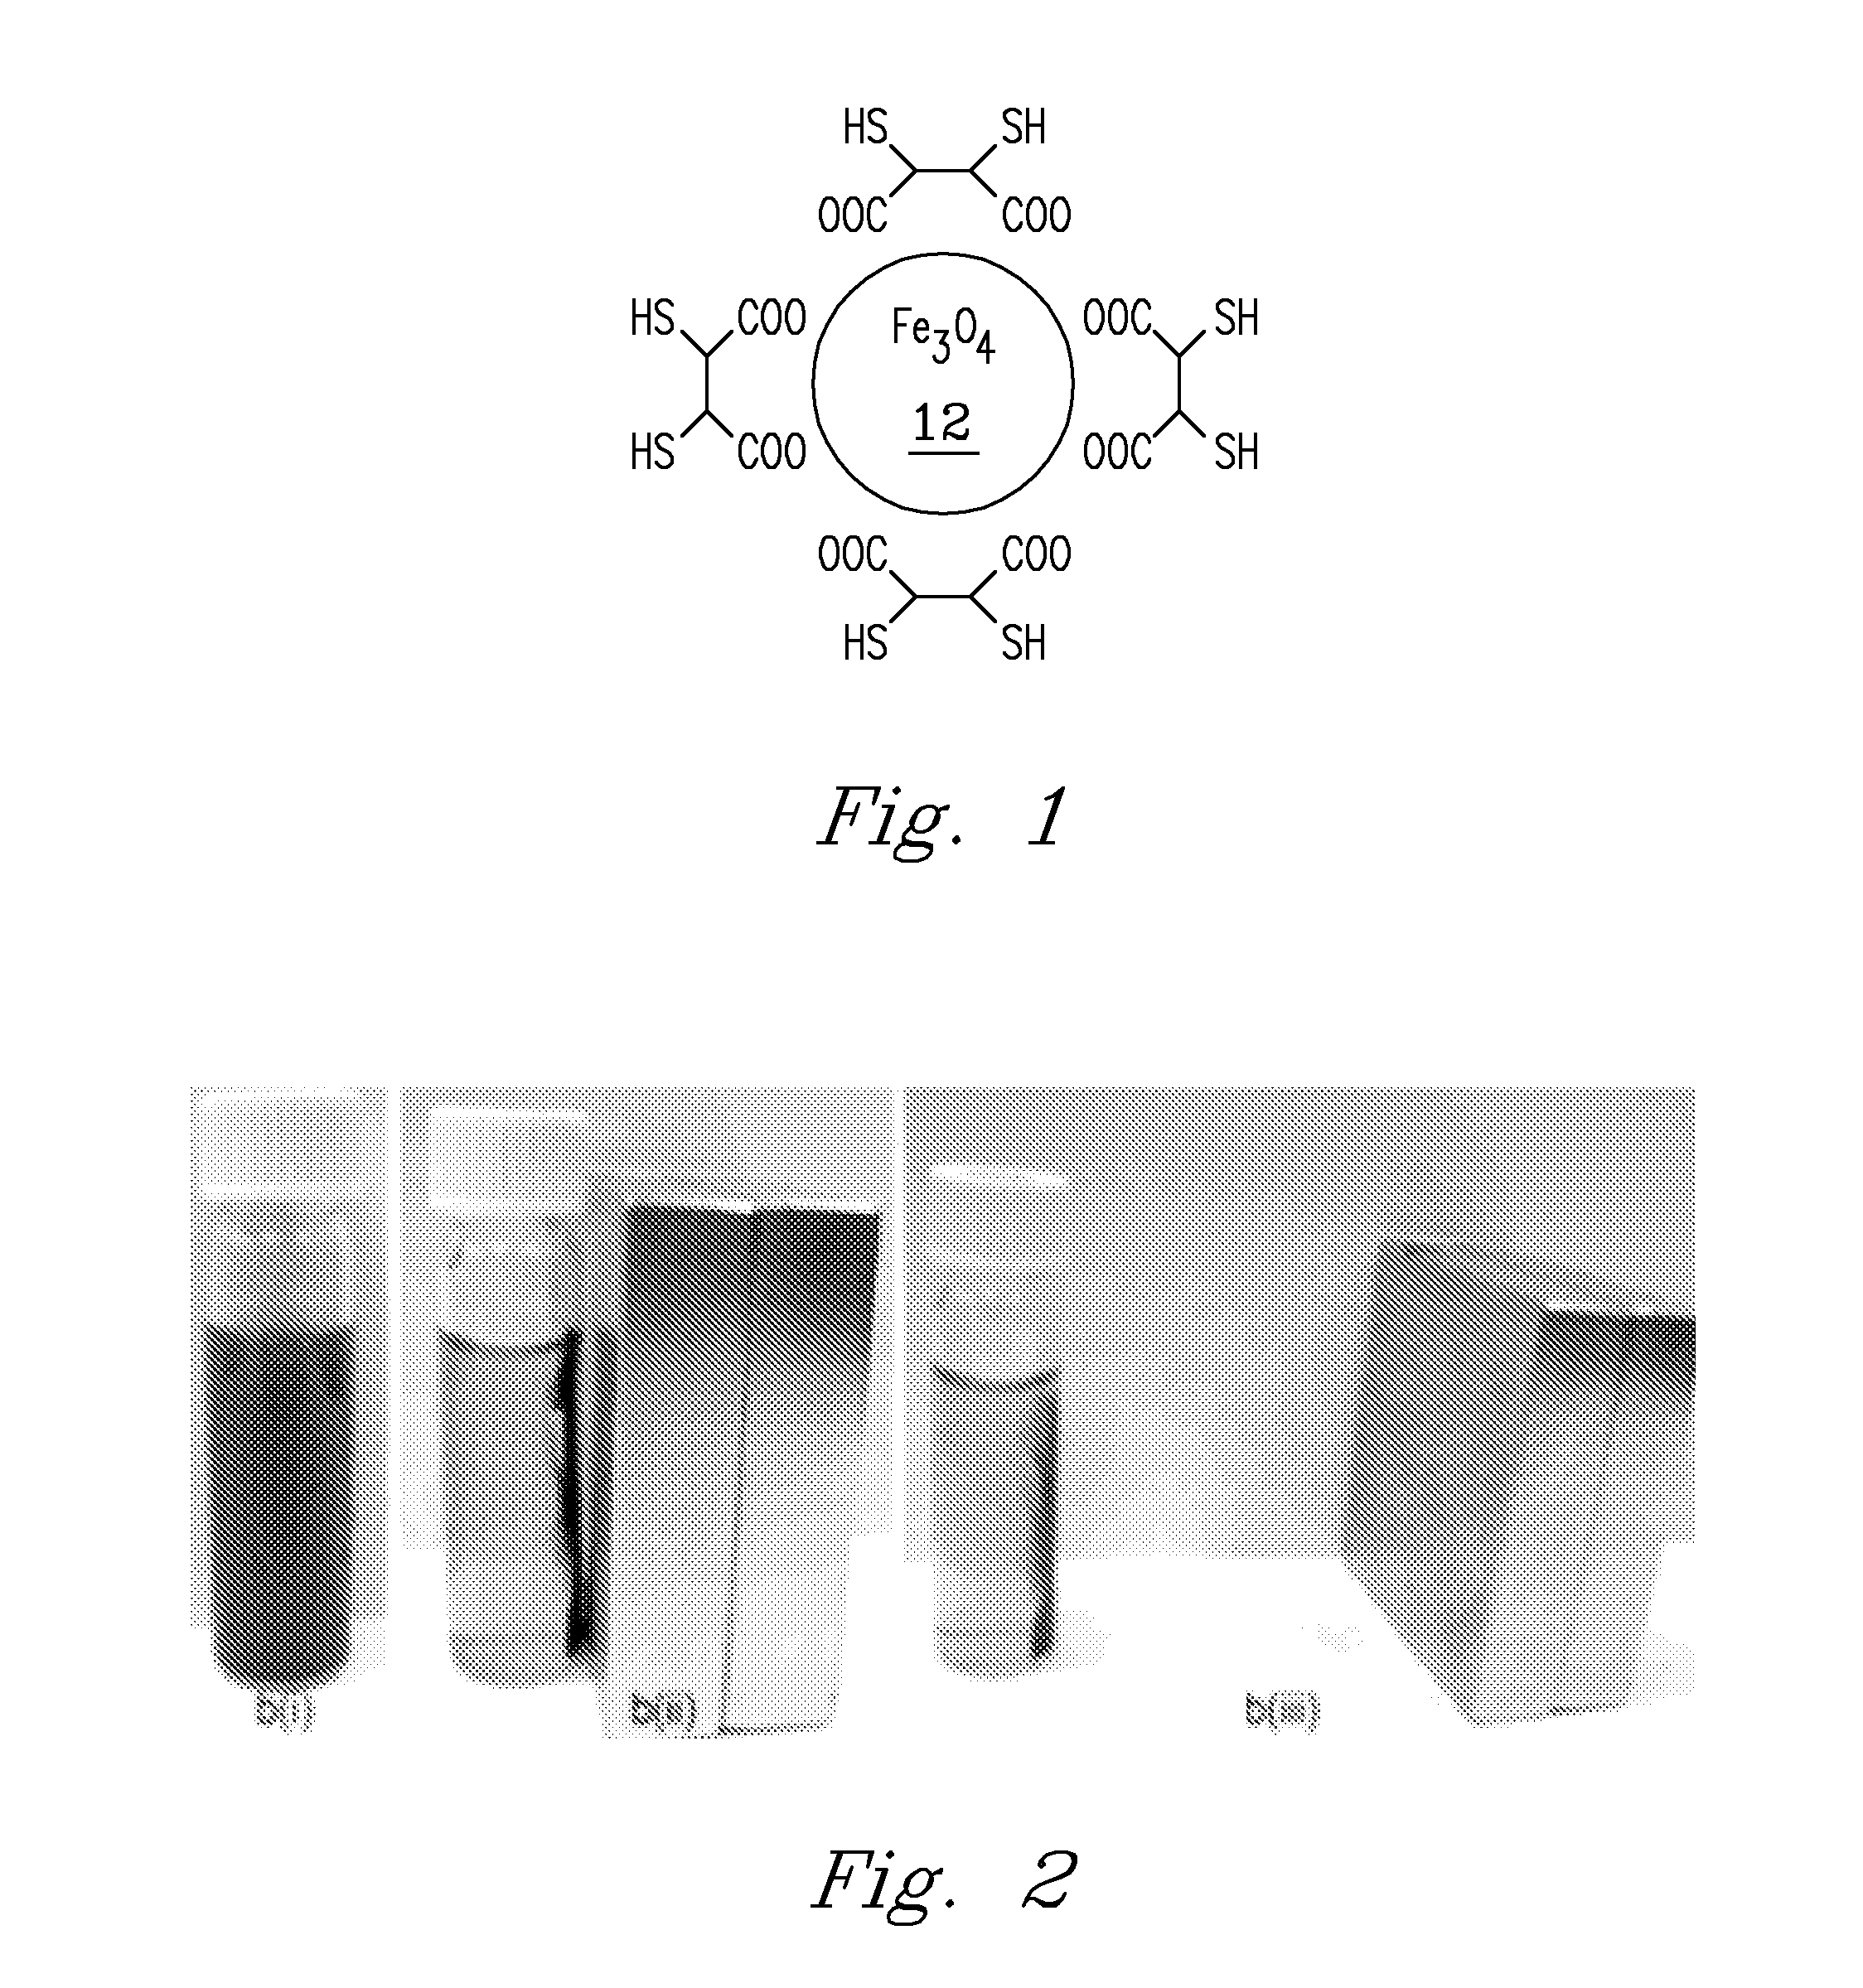 Functionalized magnetic nanoparticle analyte sensor